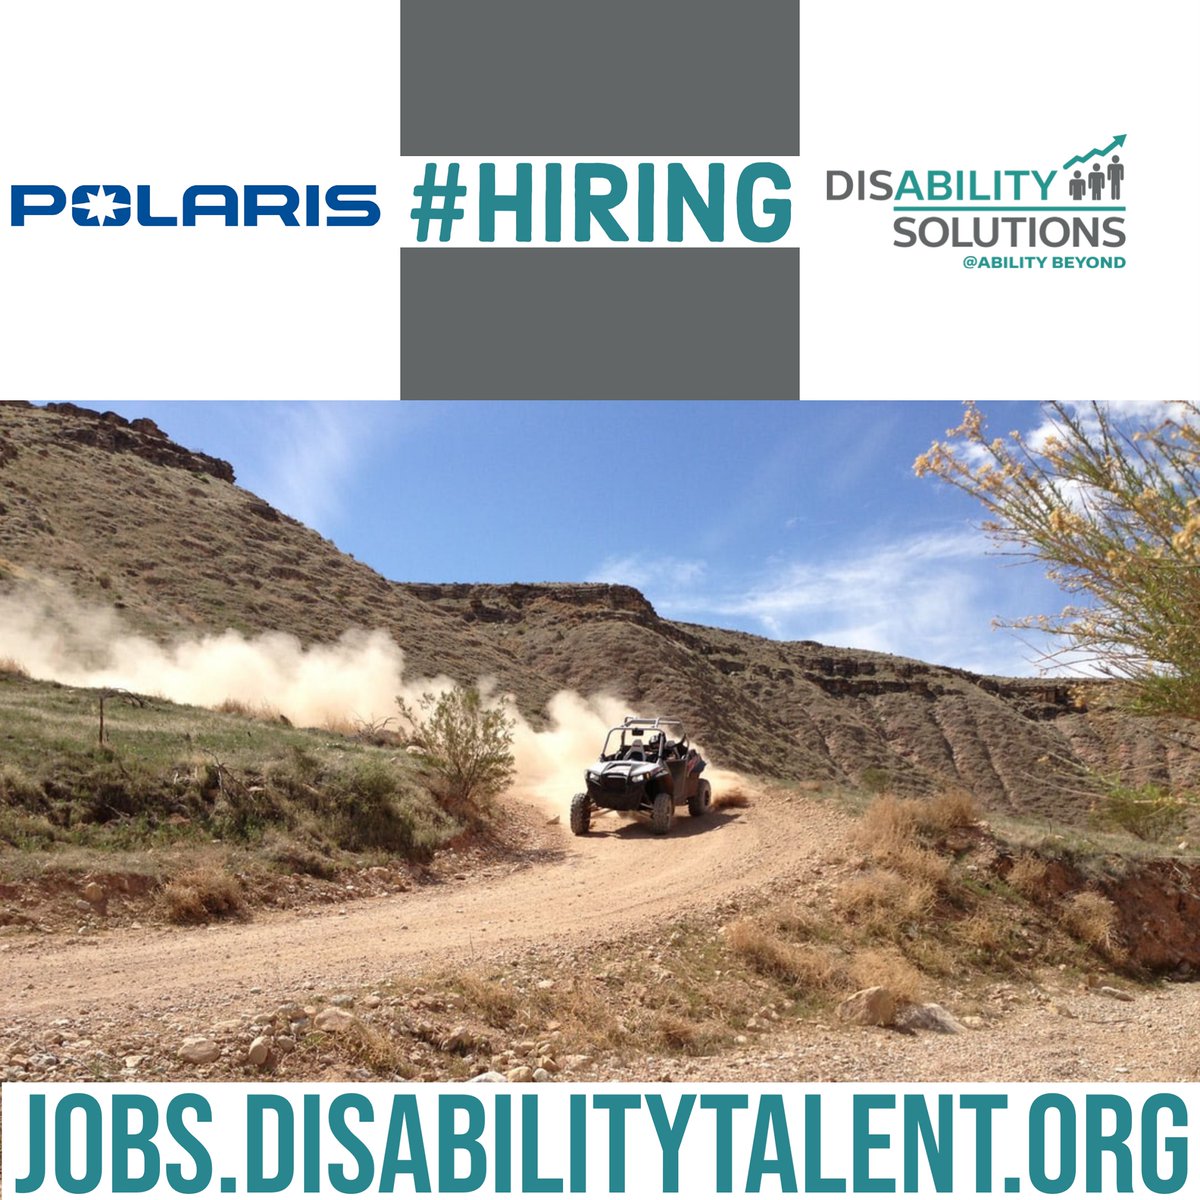 @PolarisInc is hiring!

Apply on the @DSTalentatWork Career Center by clicking here- 
hubs.la/Q01V37YW0

@PolarisInc designs, engineers, manufactures and markets innovative, high quality off-road vehicles.  

#Hiring #Disability #DisabilityEmployment